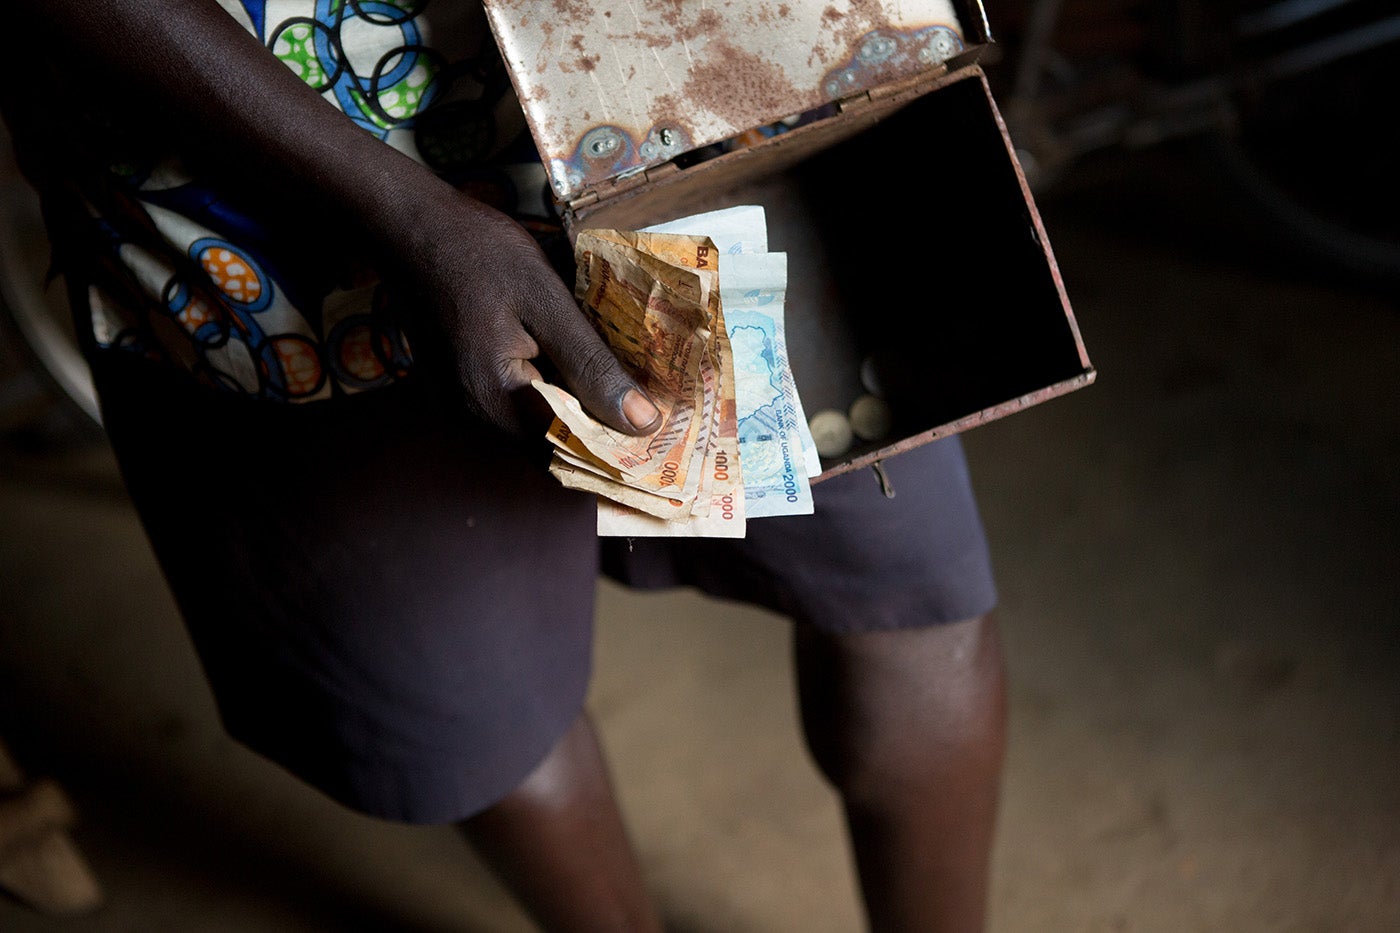 Joseph, a smallholder farmer in Uganda, doesn't have a bank account. He saves in a lock box at his house. Photo: Allison Shelley